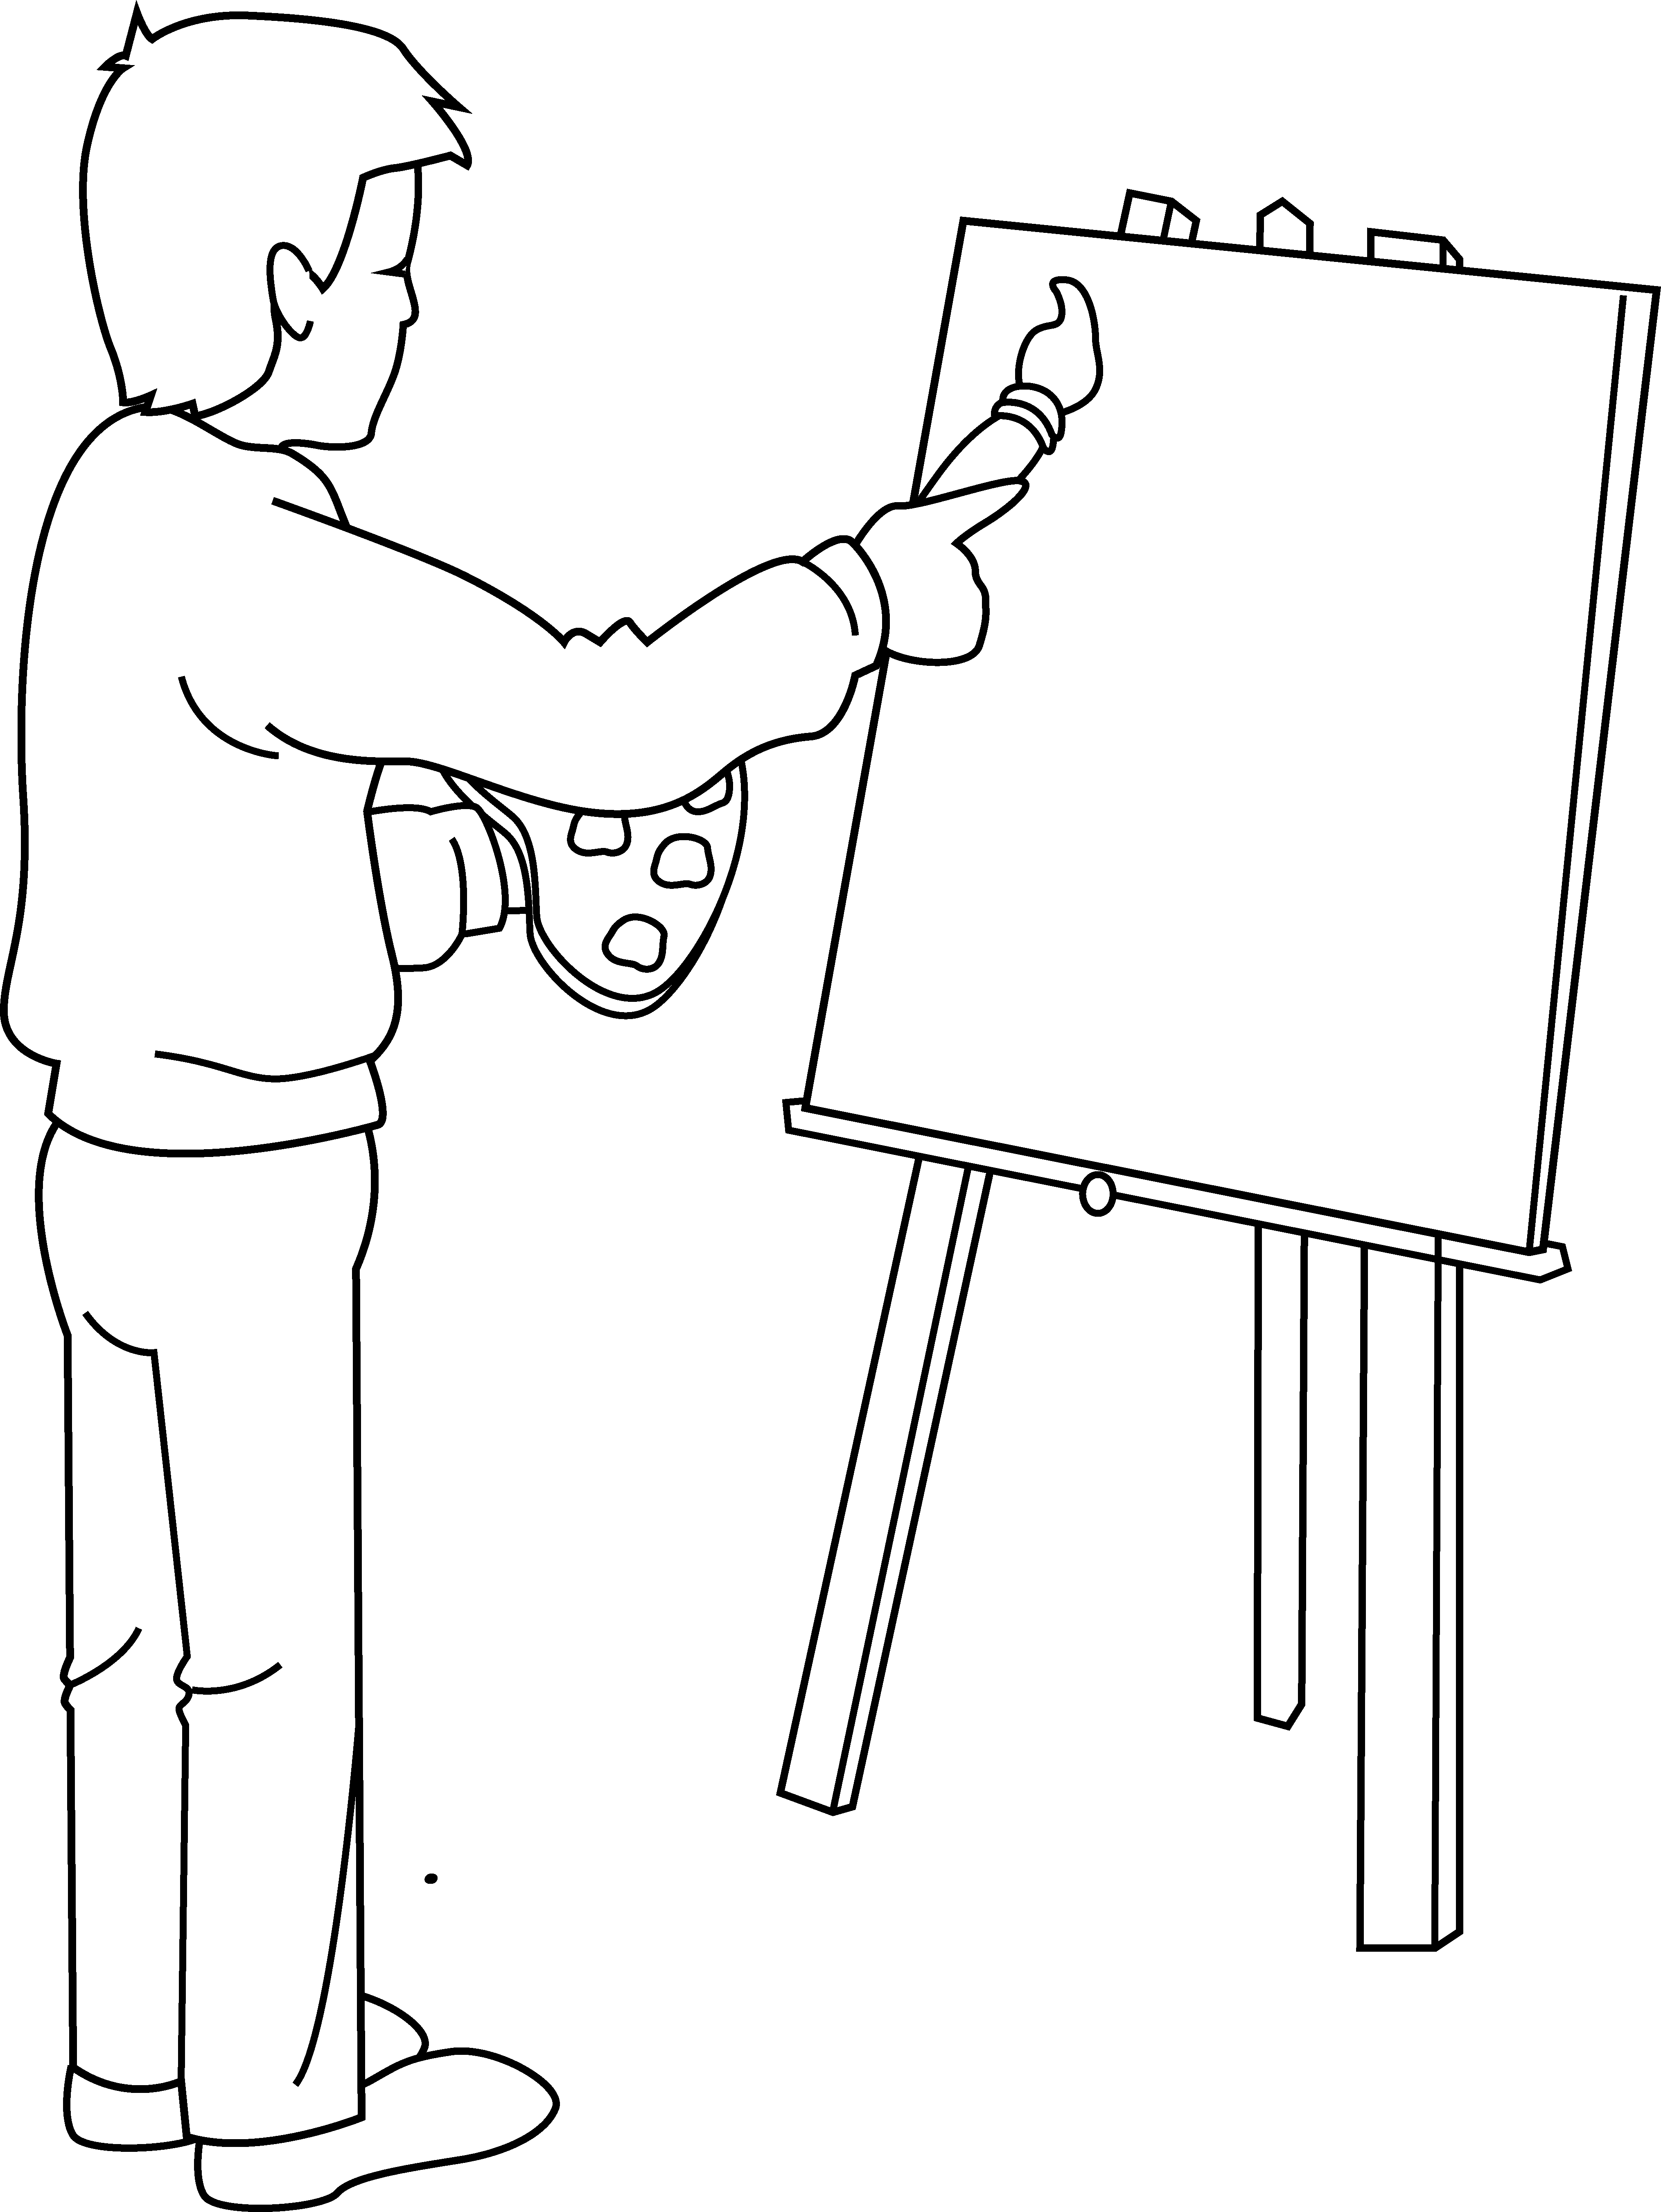 Coloring Page of Artist Painting - Free Clip Art